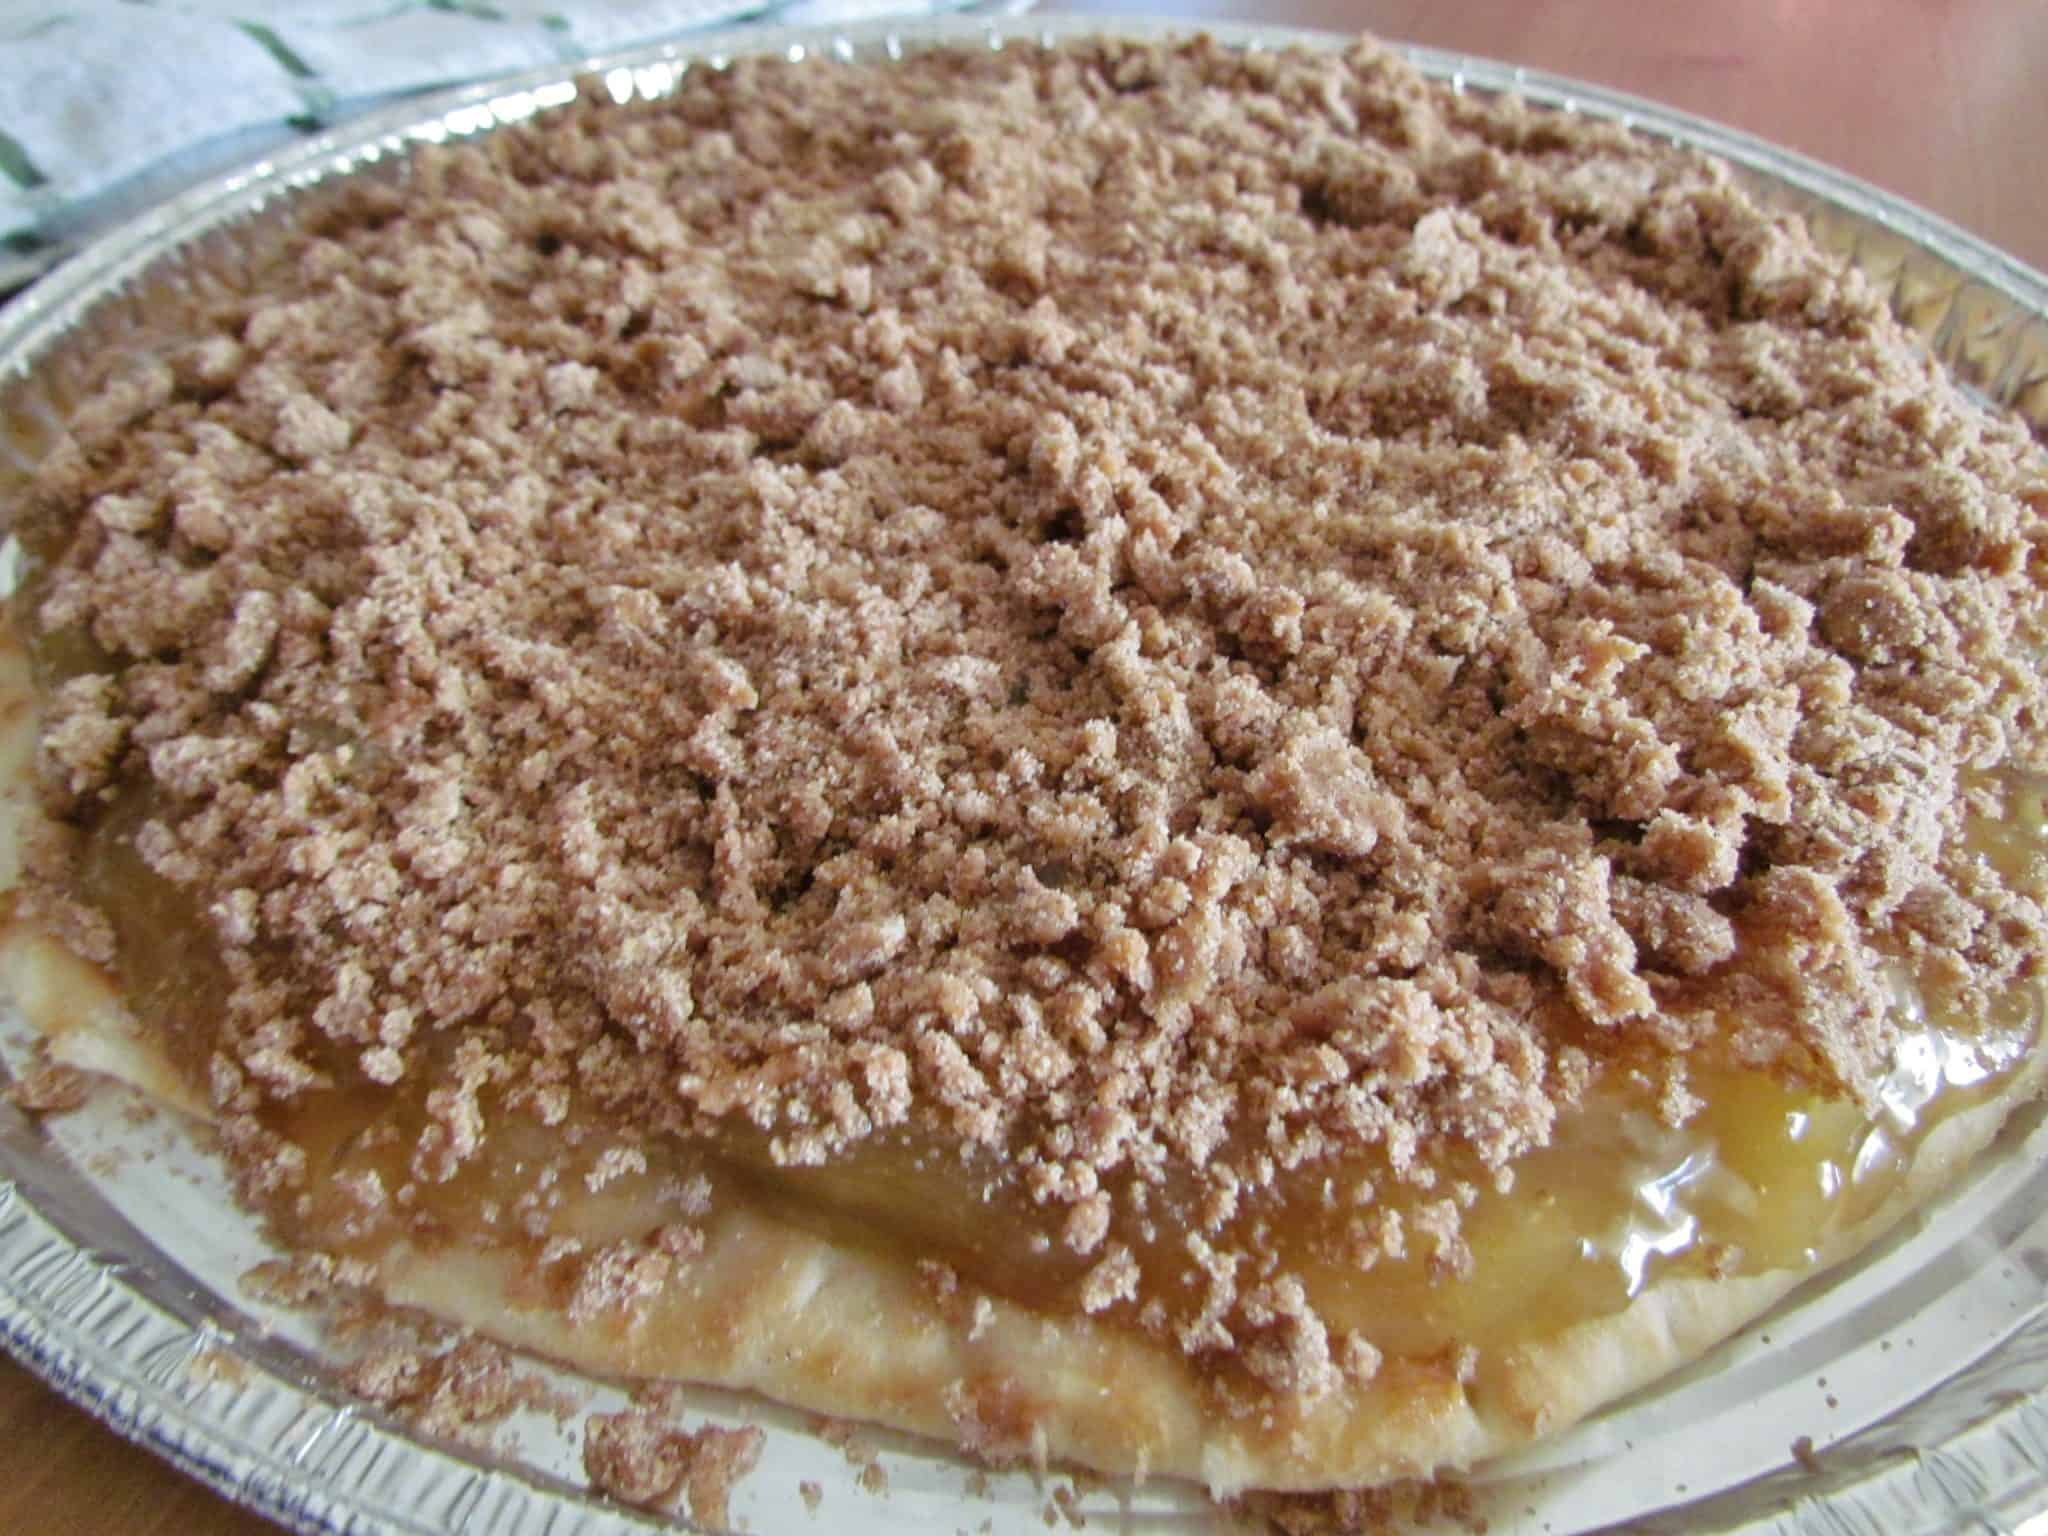 brown sugar crumble topping sprinkled over apple pie filling on pizza crust.